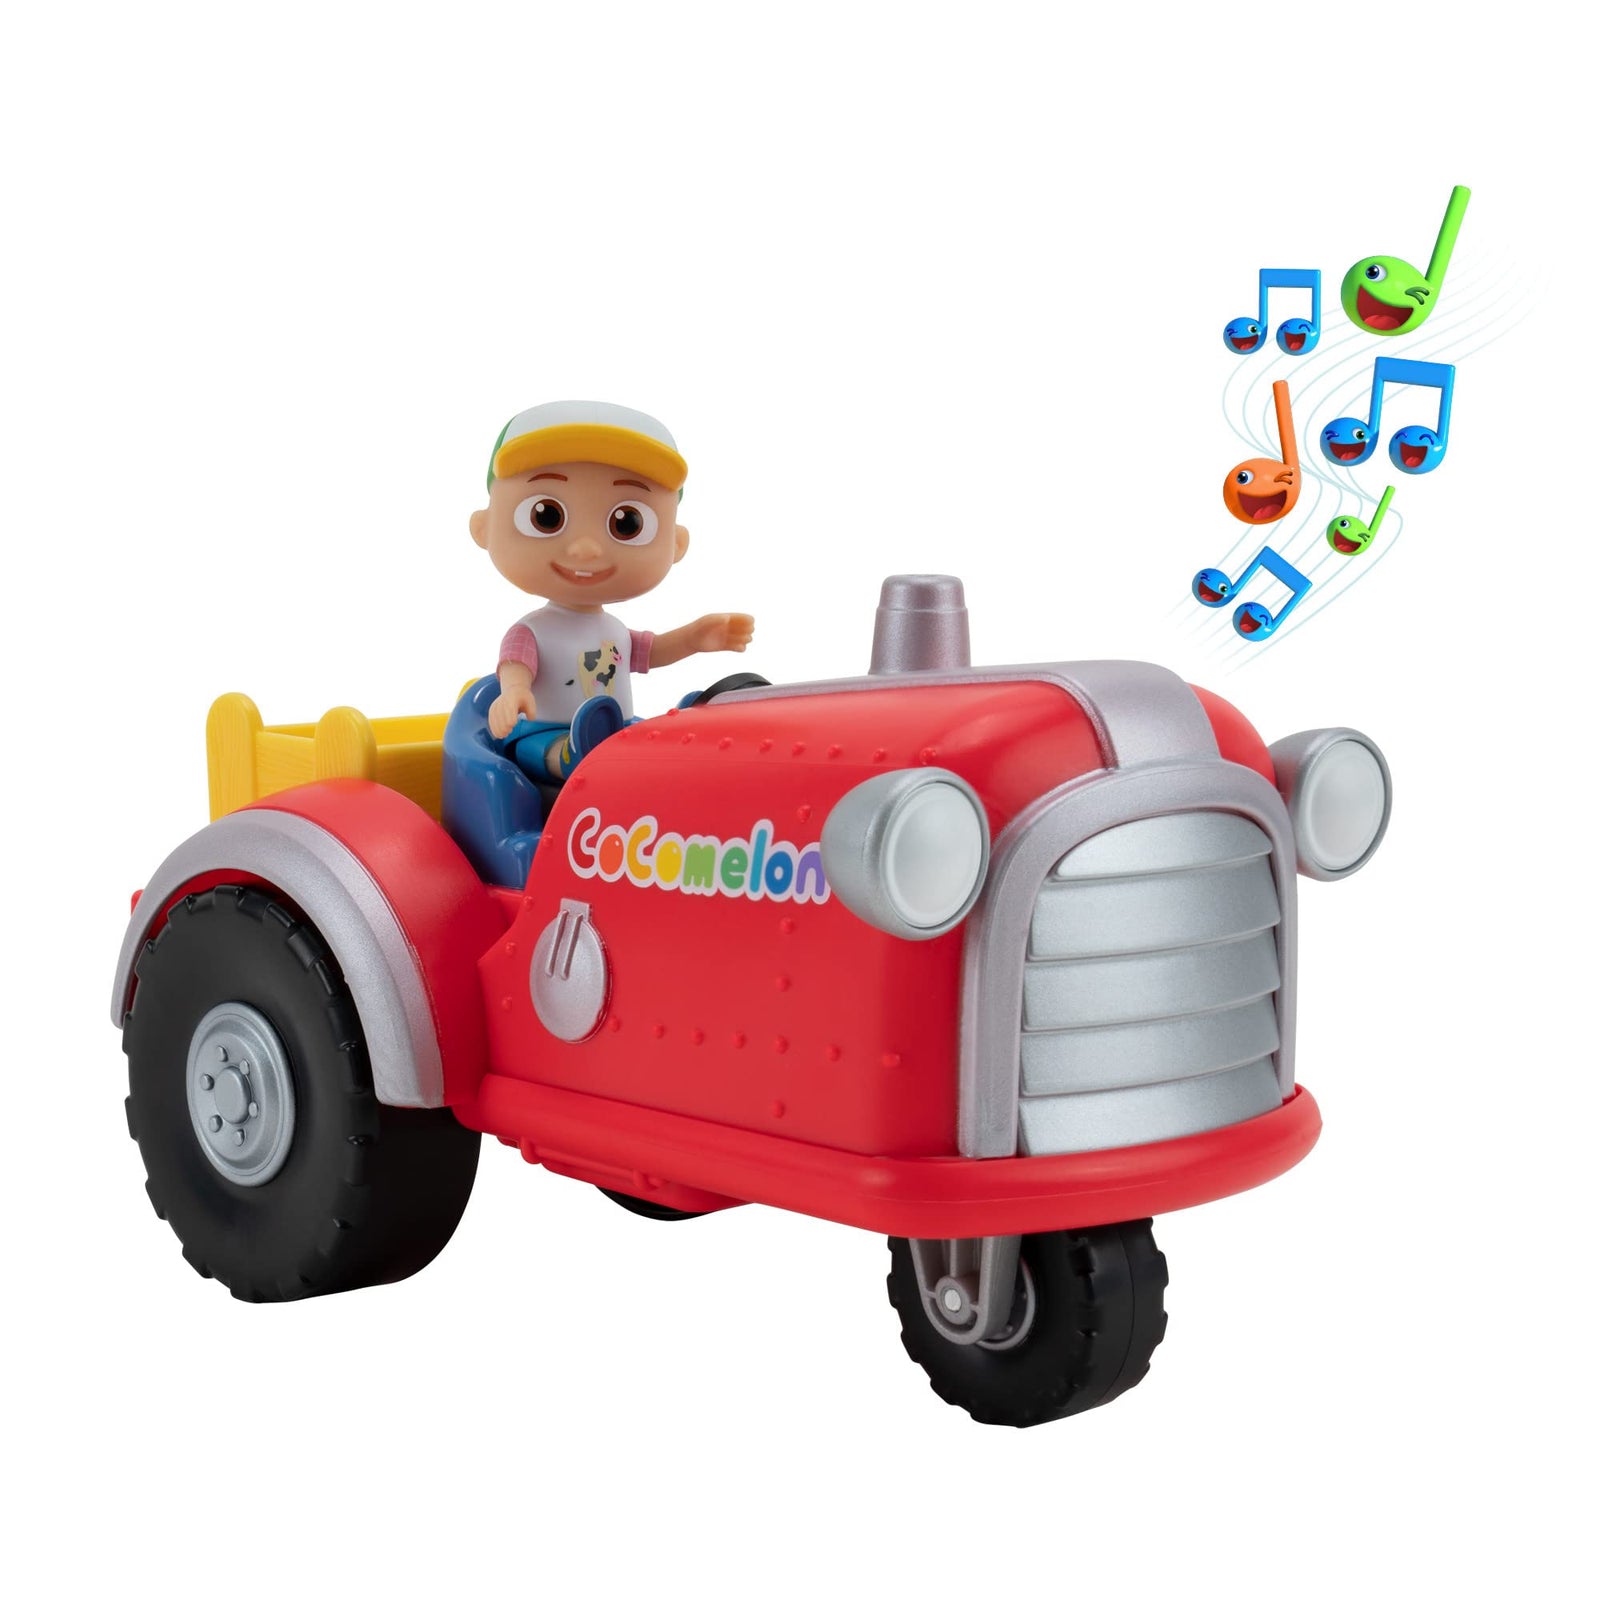 CoComelon Official Musical Tractor w/ Sounds & Exclusive 3-inch Farm JJ Toy, Play a Clip of “Old Macdonald” Song Plus More Sounds and Phrases